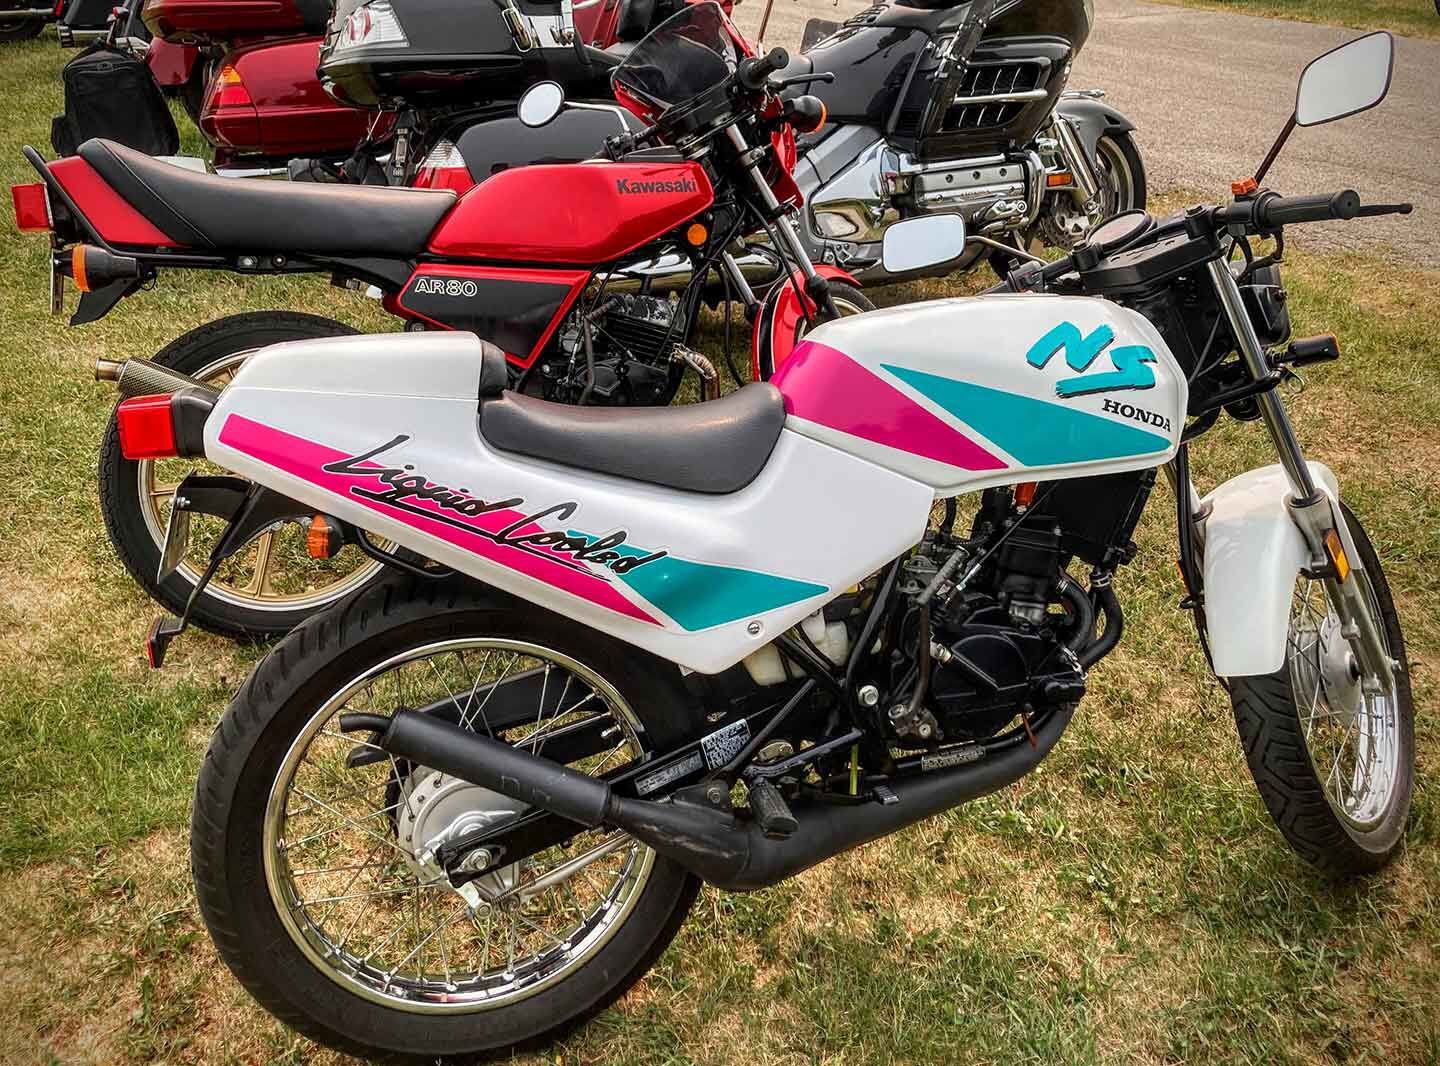 One of around 200 Honda NS50Fs in existence in the USA, with an equally rare Kawasaki AR80 in the background.